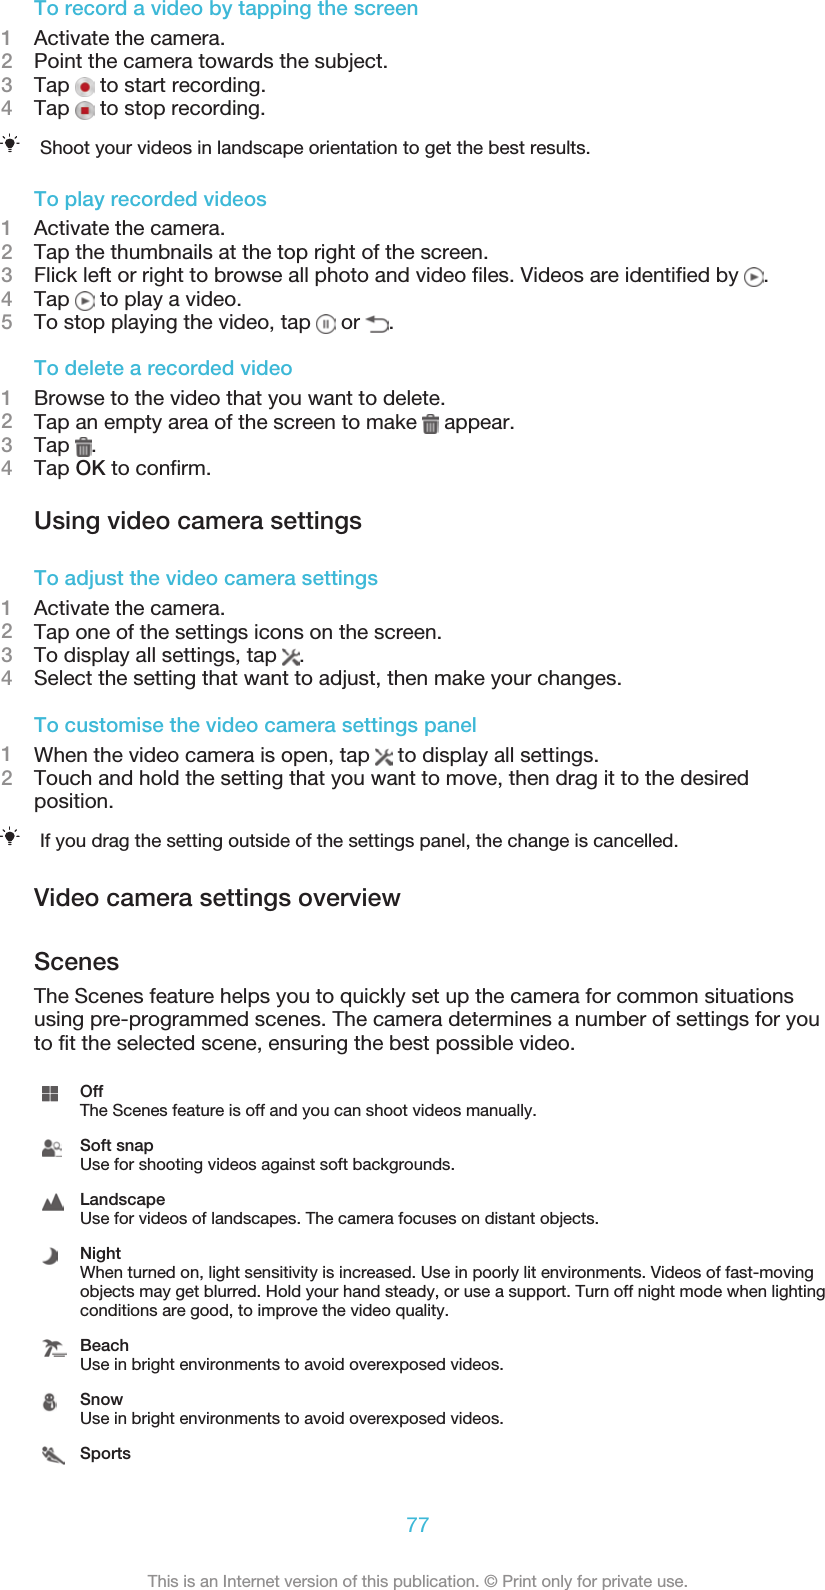 To record a video by tapping the screen1Activate the camera.2Point the camera towards the subject.3Tap   to start recording.4Tap   to stop recording.Shoot your videos in landscape orientation to get the best results.To play recorded videos1Activate the camera.2Tap the thumbnails at the top right of the screen.3Flick left or right to browse all photo and video files. Videos are identified by  .4Tap   to play a video.5To stop playing the video, tap   or  .To delete a recorded video1Browse to the video that you want to delete.2Tap an empty area of the screen to make   appear.3Tap  .4Tap OK to confirm.Using video camera settingsTo adjust the video camera settings1Activate the camera.2Tap one of the settings icons on the screen.3To display all settings, tap  .4Select the setting that want to adjust, then make your changes.To customise the video camera settings panel1When the video camera is open, tap   to display all settings.2Touch and hold the setting that you want to move, then drag it to the desiredposition.If you drag the setting outside of the settings panel, the change is cancelled.Video camera settings overviewScenesThe Scenes feature helps you to quickly set up the camera for common situationsusing pre-programmed scenes. The camera determines a number of settings for youto fit the selected scene, ensuring the best possible video.OffThe Scenes feature is off and you can shoot videos manually.Soft snapUse for shooting videos against soft backgrounds.LandscapeUse for videos of landscapes. The camera focuses on distant objects.NightWhen turned on, light sensitivity is increased. Use in poorly lit environments. Videos of fast-movingobjects may get blurred. Hold your hand steady, or use a support. Turn off night mode when lightingconditions are good, to improve the video quality.BeachUse in bright environments to avoid overexposed videos.SnowUse in bright environments to avoid overexposed videos.Sports77This is an Internet version of this publication. © Print only for private use.